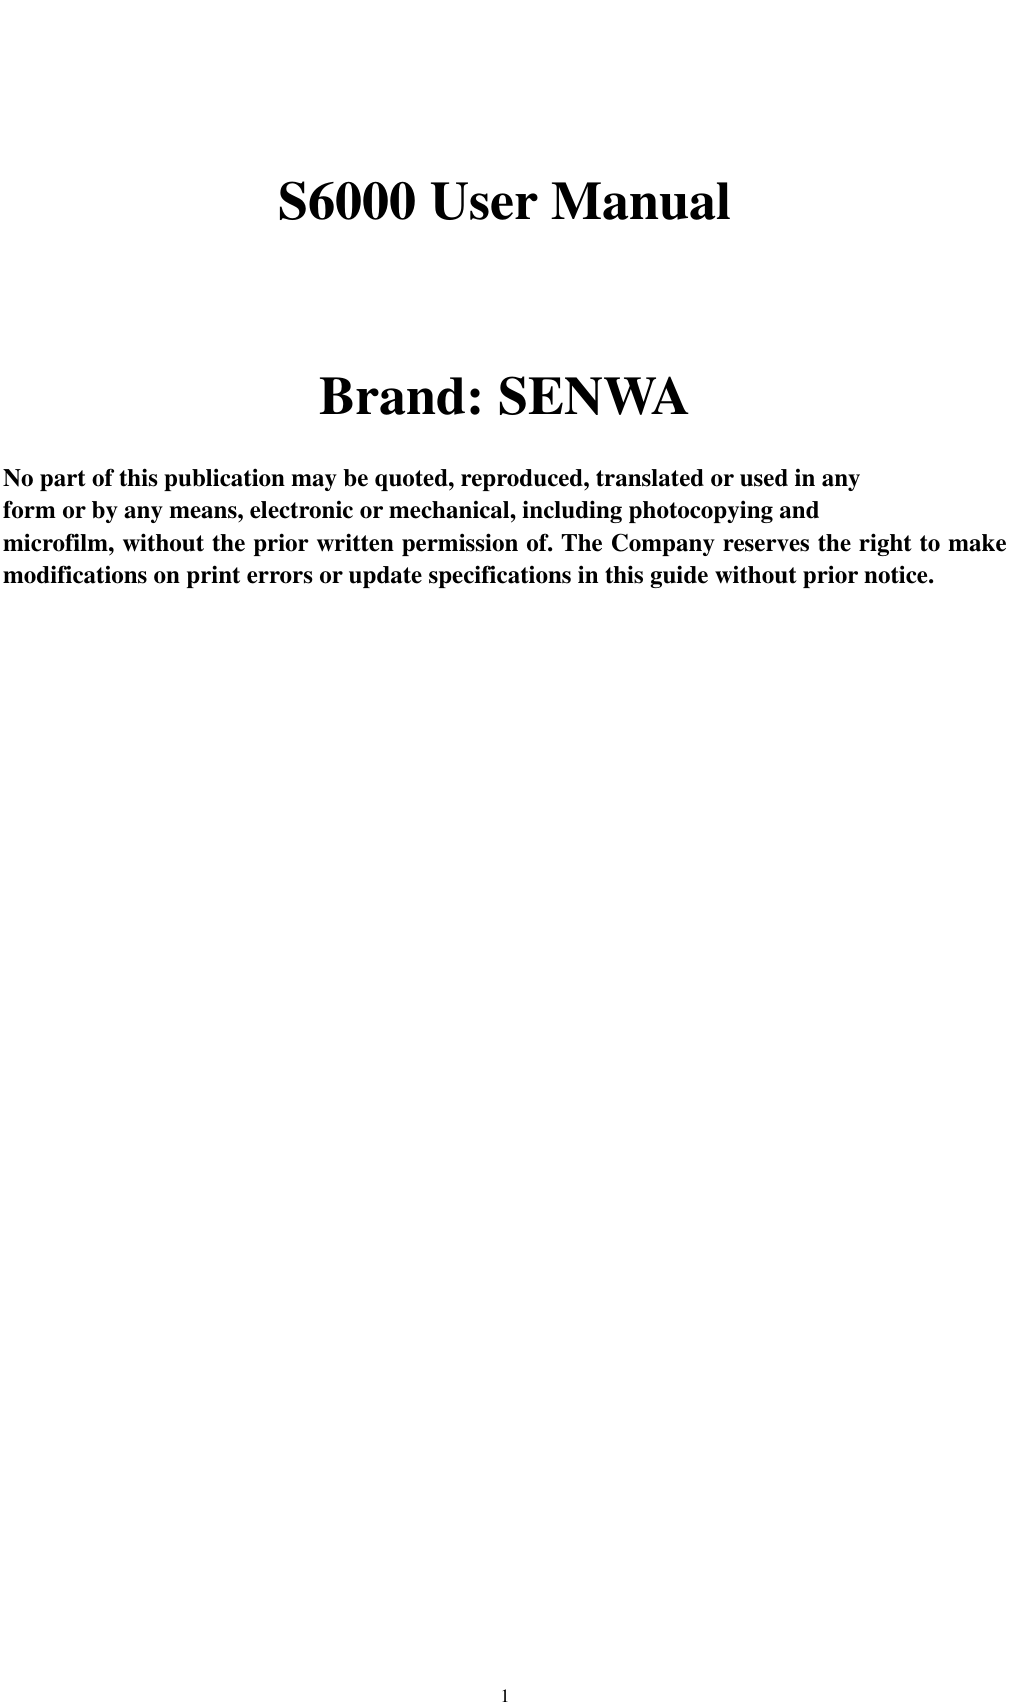    1  S6000 User Manual   Brand: SENWA  No part of this publication may be quoted, reproduced, translated or used in any   form or by any means, electronic or mechanical, including photocopying and   microfilm, without the prior written permission of. The Company reserves the right to make modifications on print errors or update specifications in this guide without prior notice. 